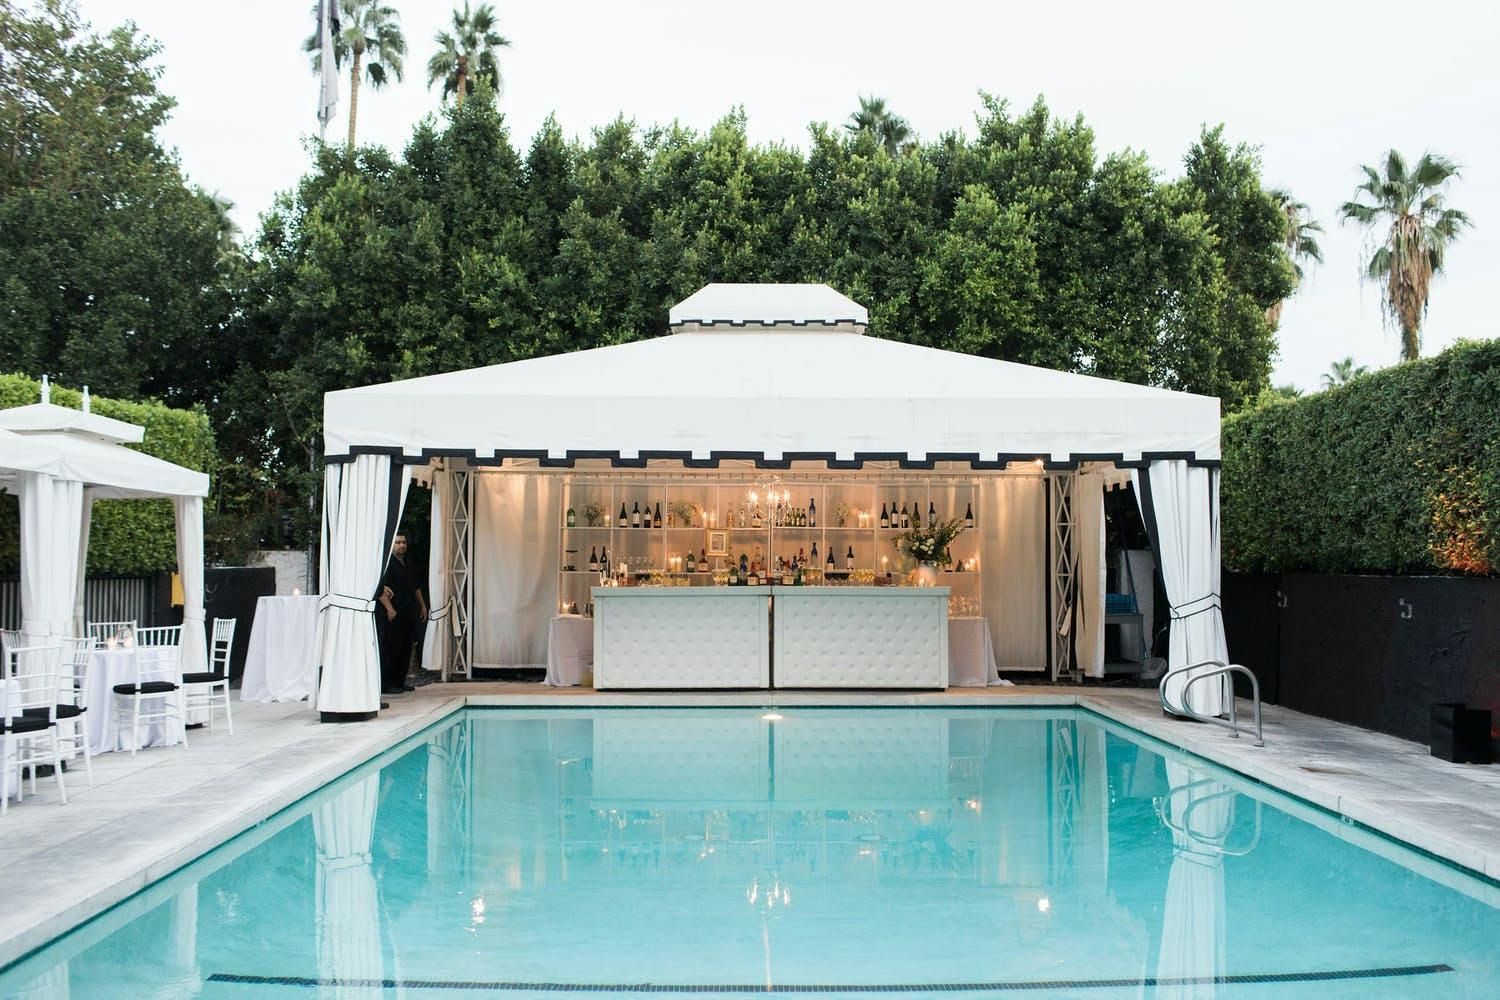 Pool Area with Black and White Cabana Bar Area | PartySlate